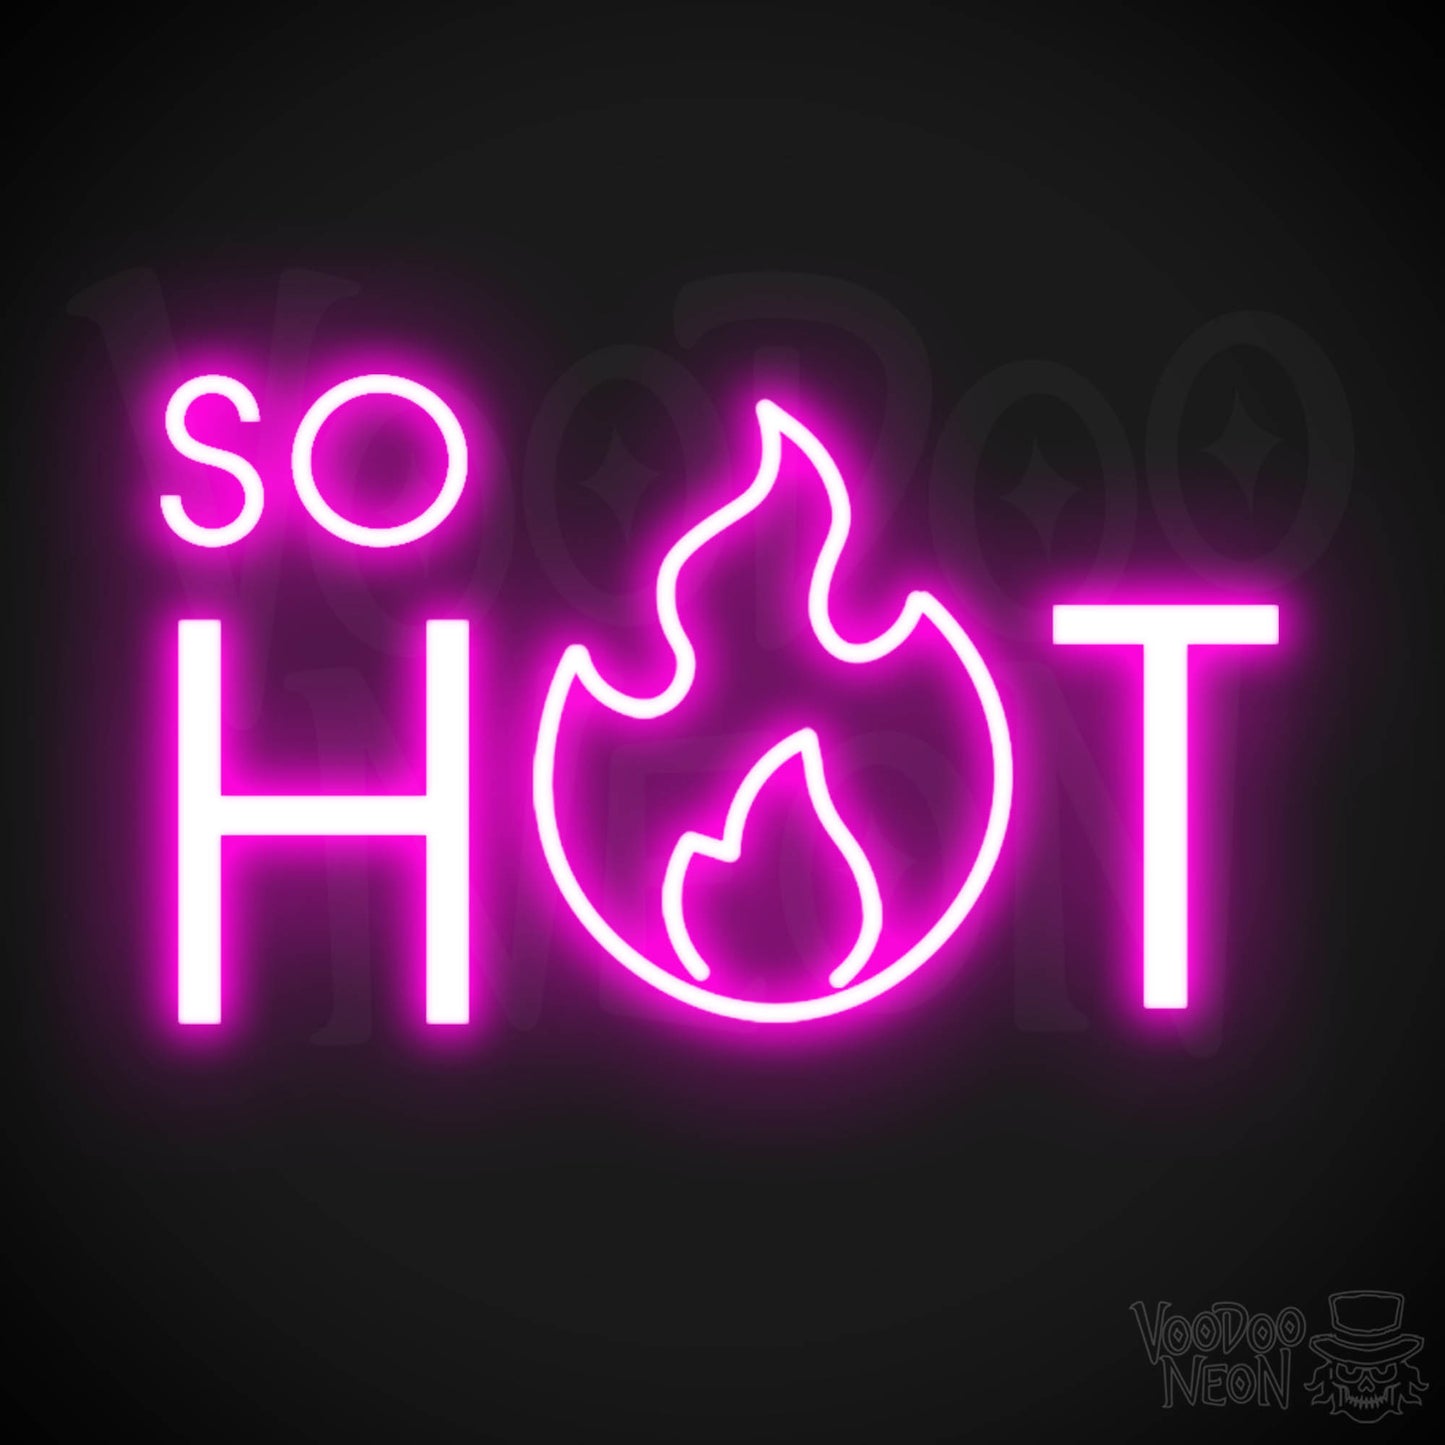 So Hot Neon Sign - Neon So Hot Sign - LED Neon Wall Art - Color Pink